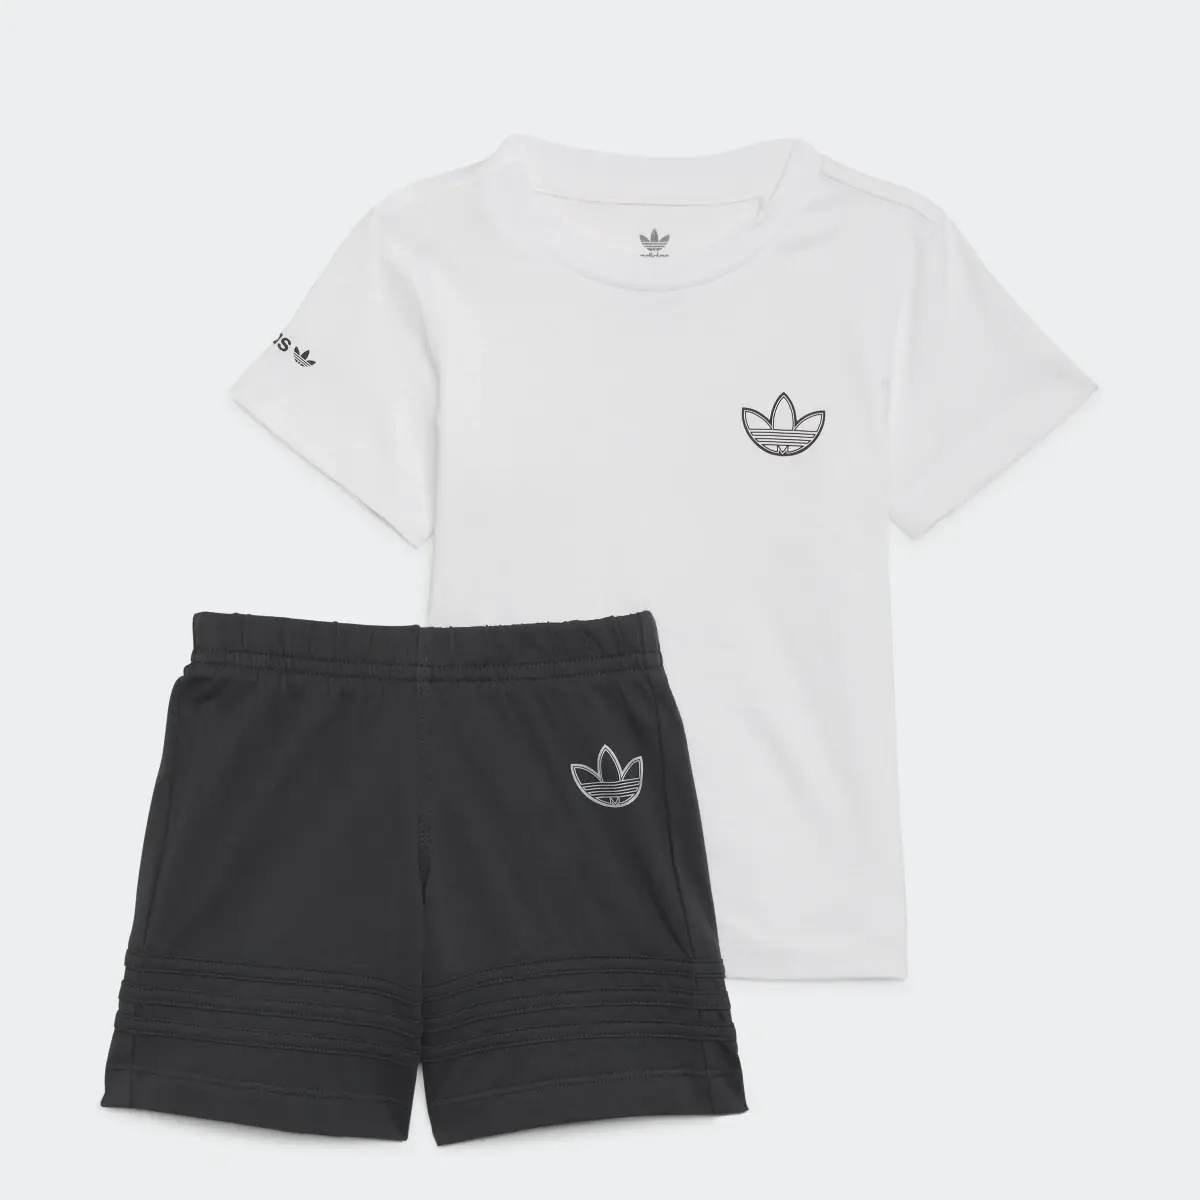 Adidas SPRT Collection Shorts and Tee Set. 1